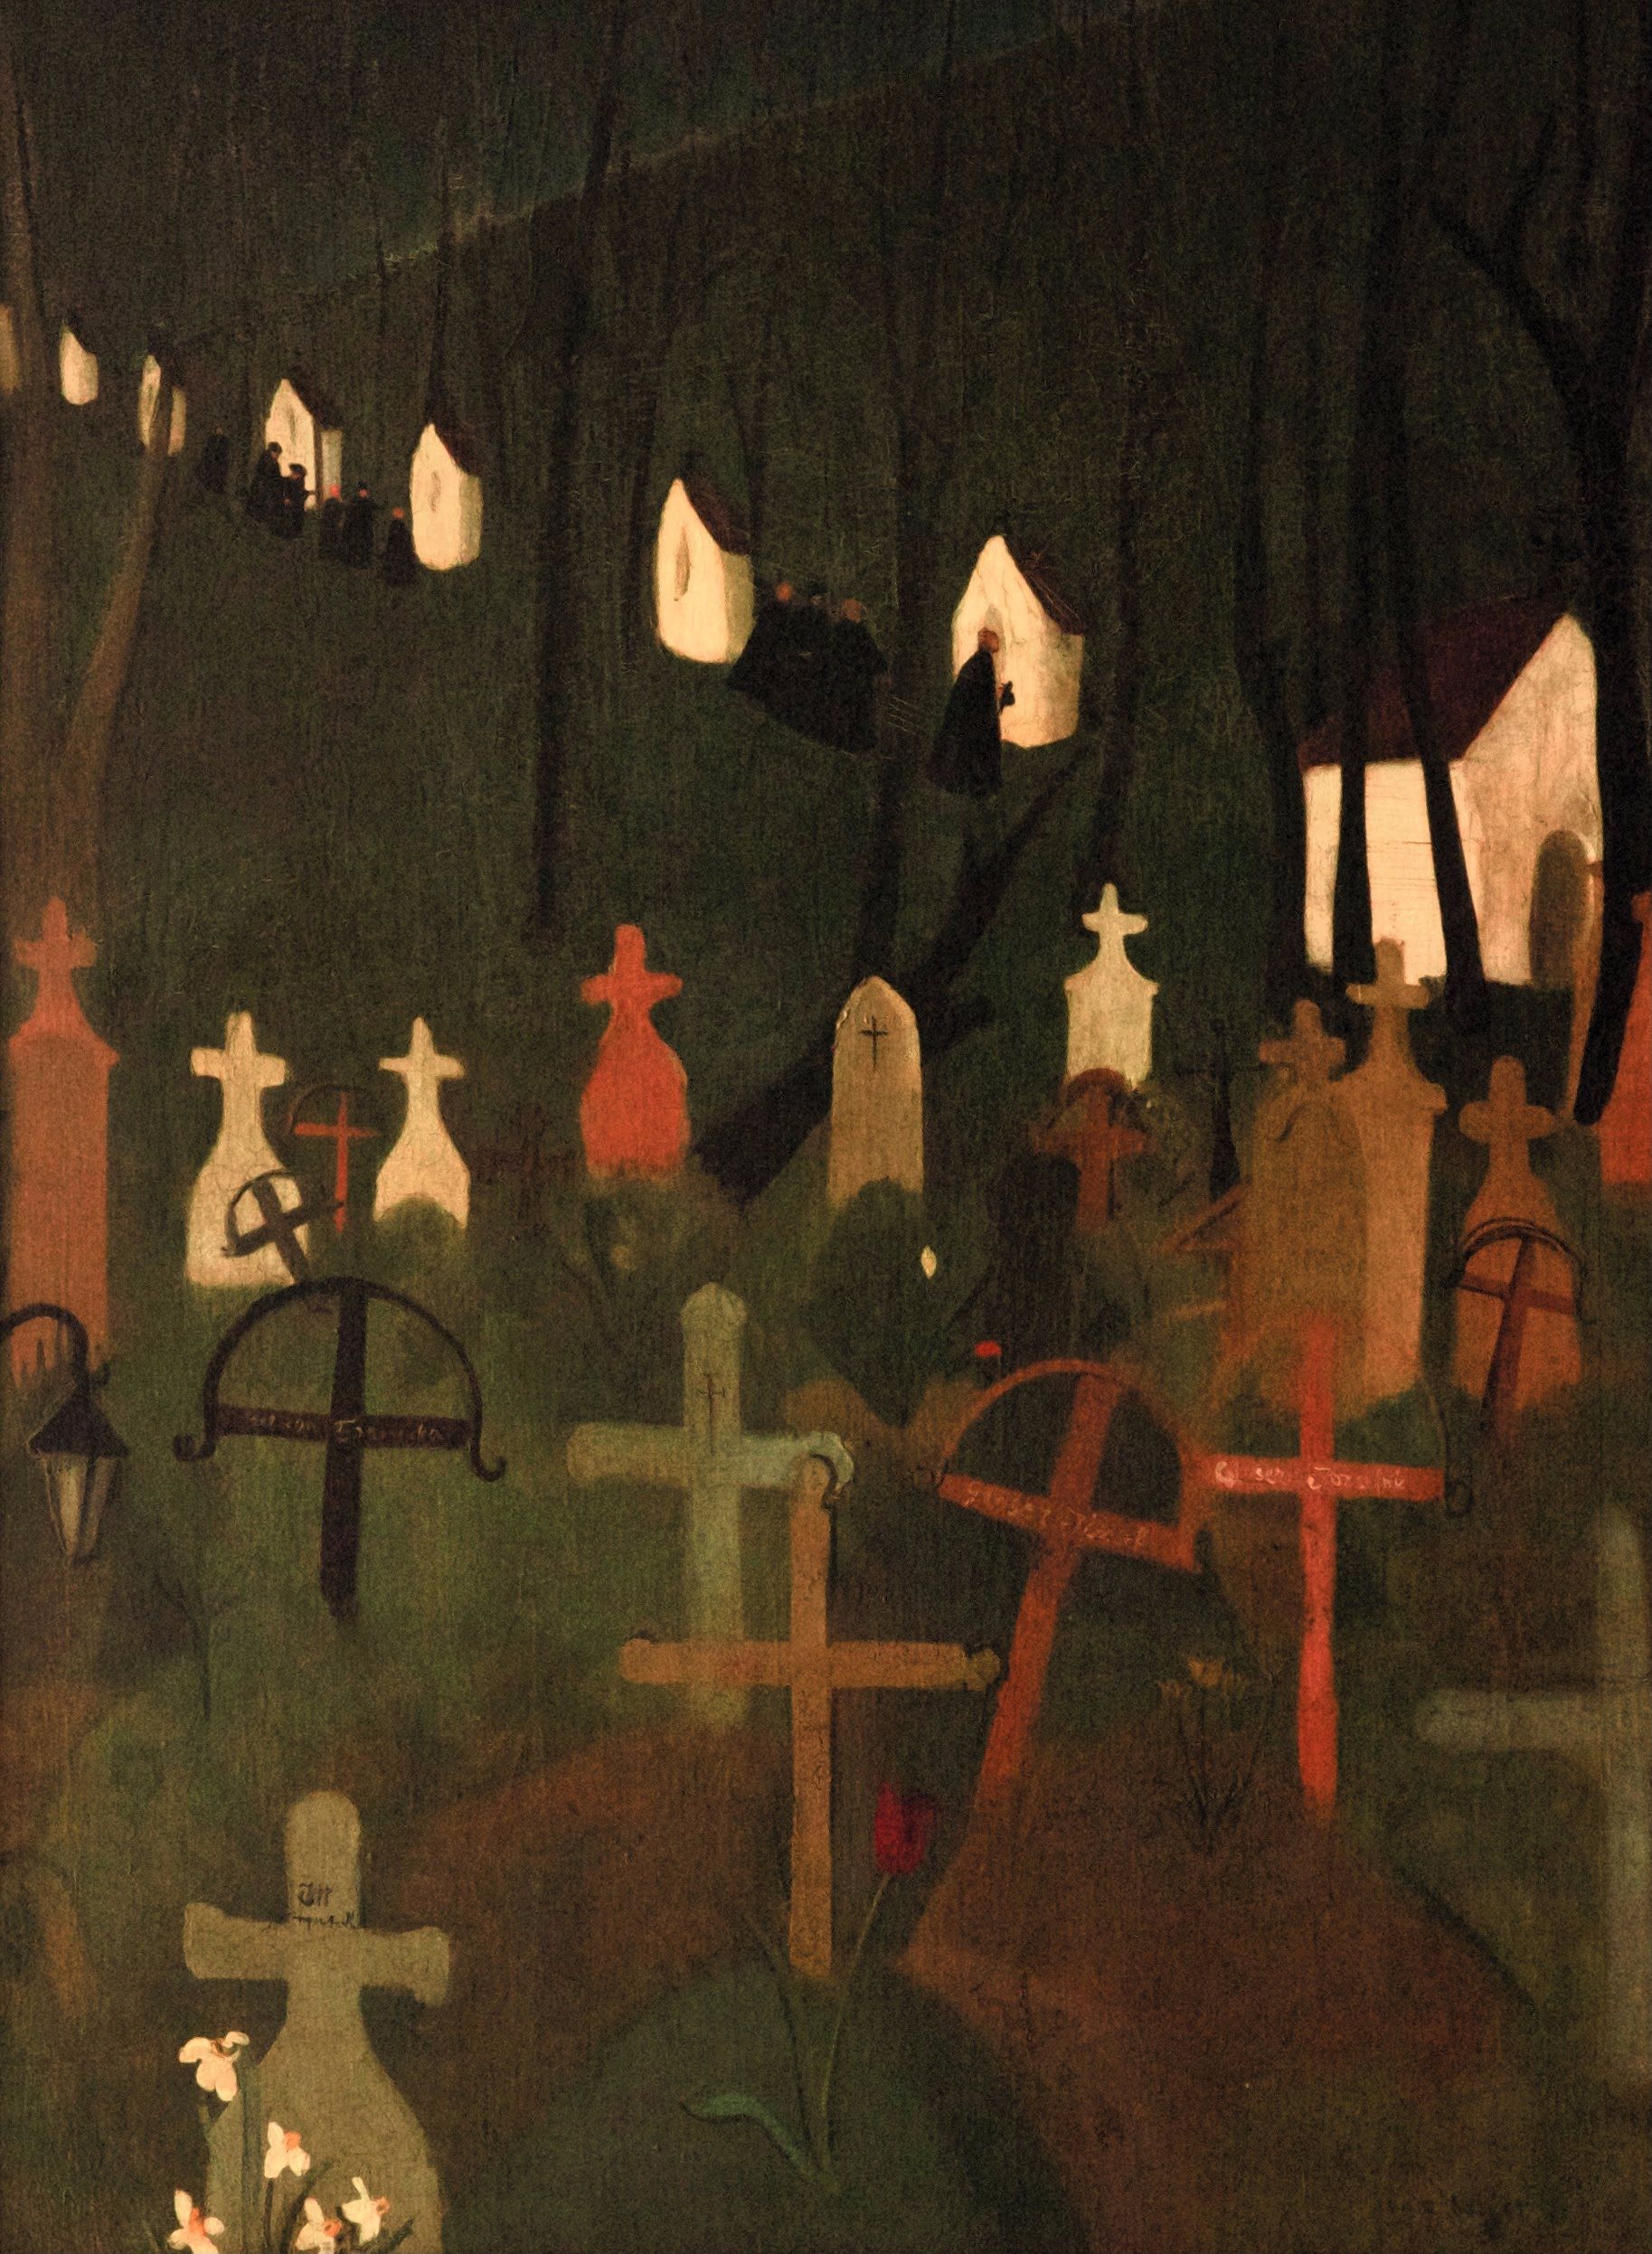 The Merry Cemetery by Amrita Sher-Gil - 1939 - 75 x 100.5 cm National Museum of New Delhi, India